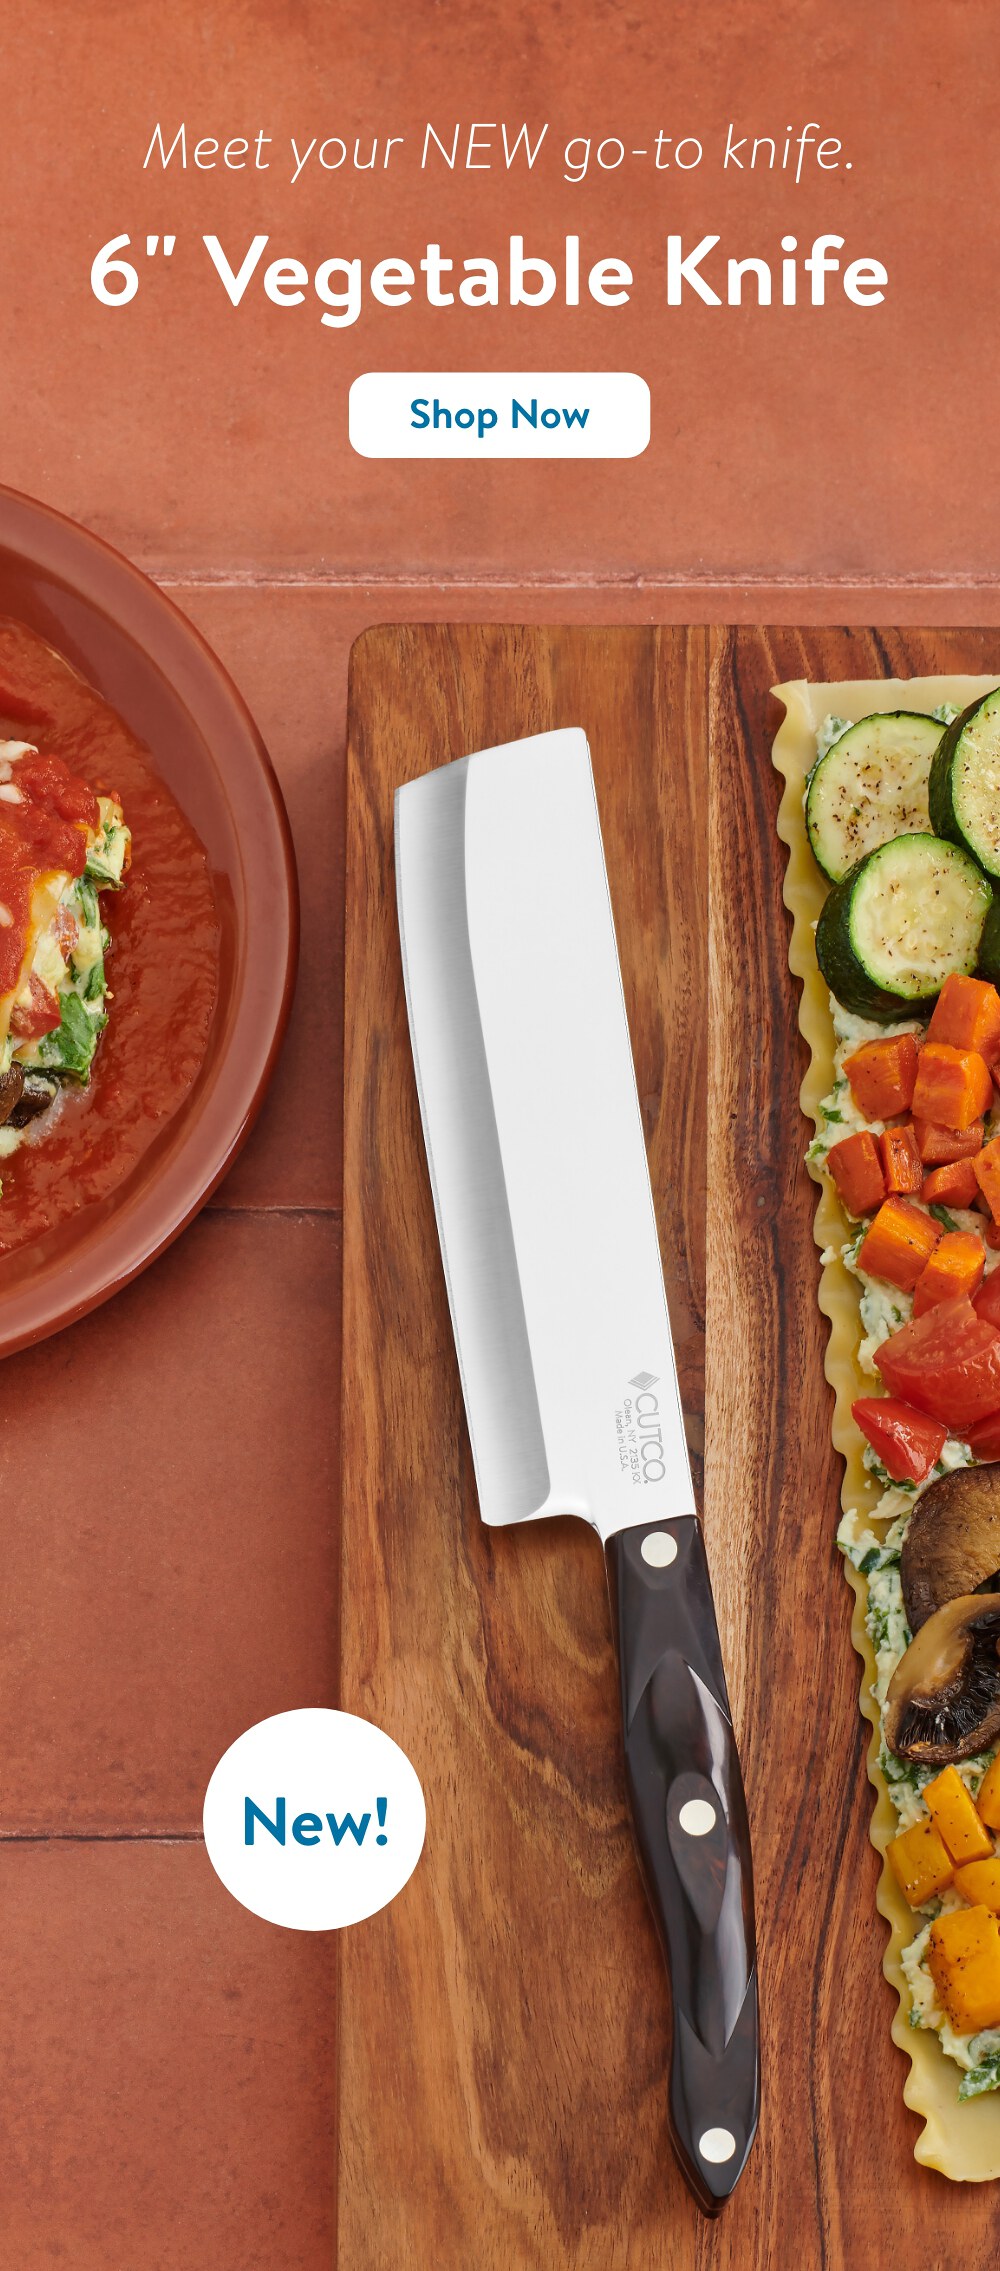 Introducing the New! 6-Inch Vegetable Knife